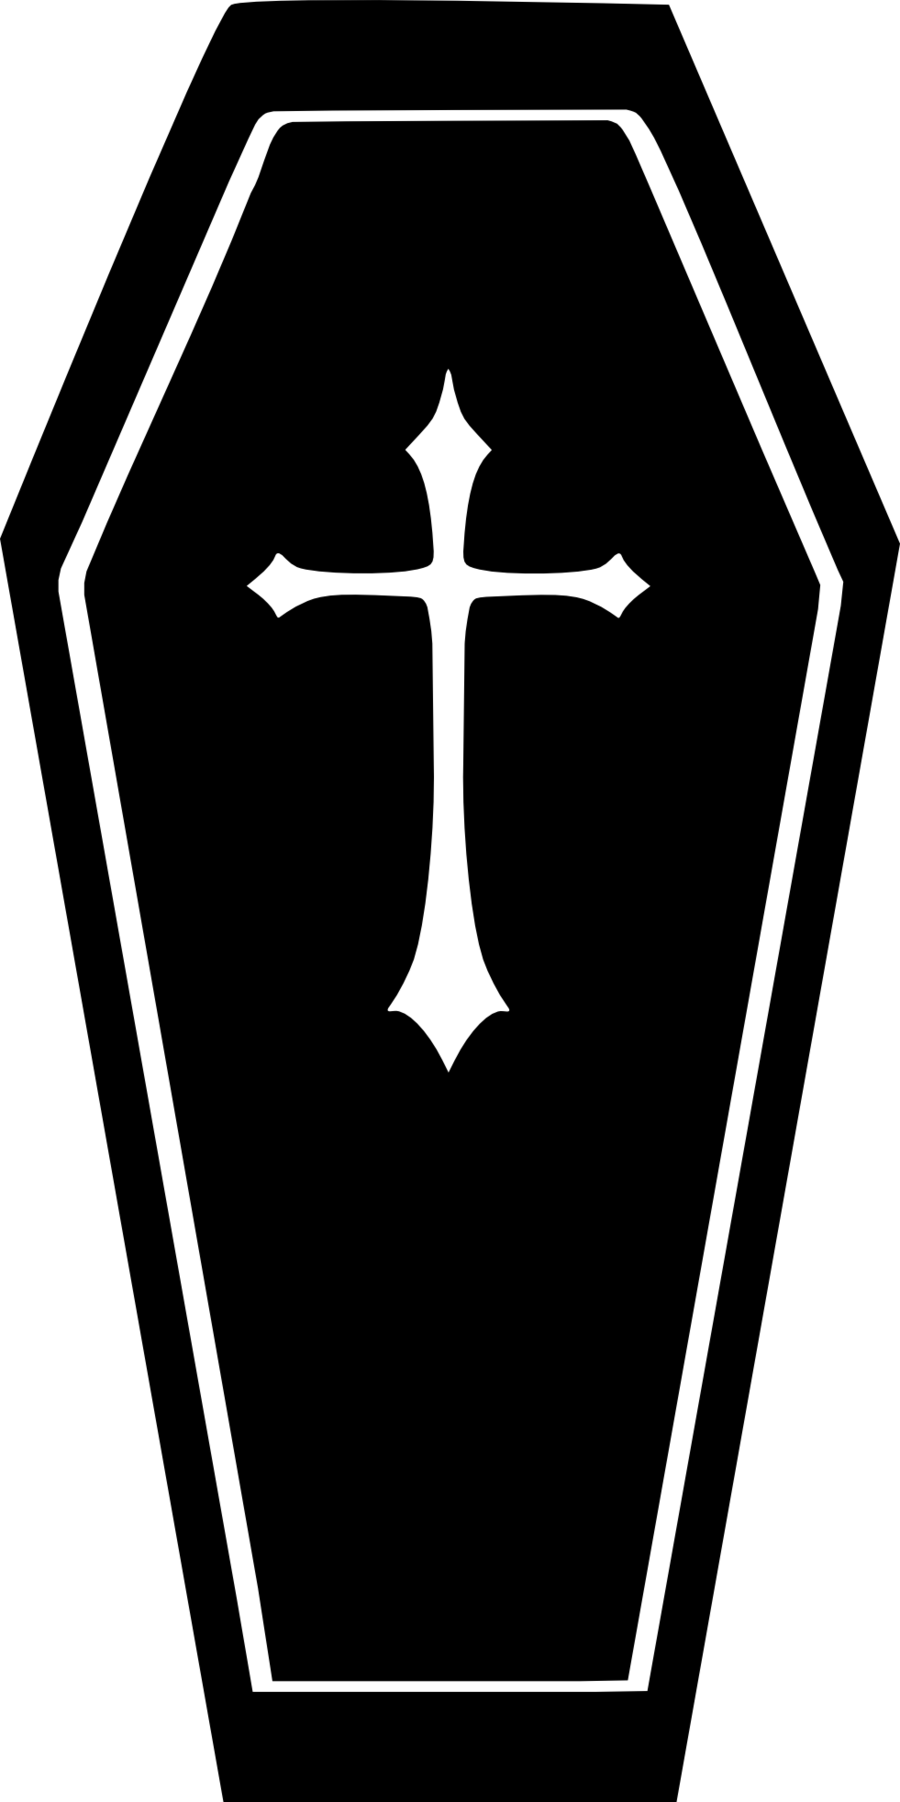 Black Coffin With Cross Design PNG image